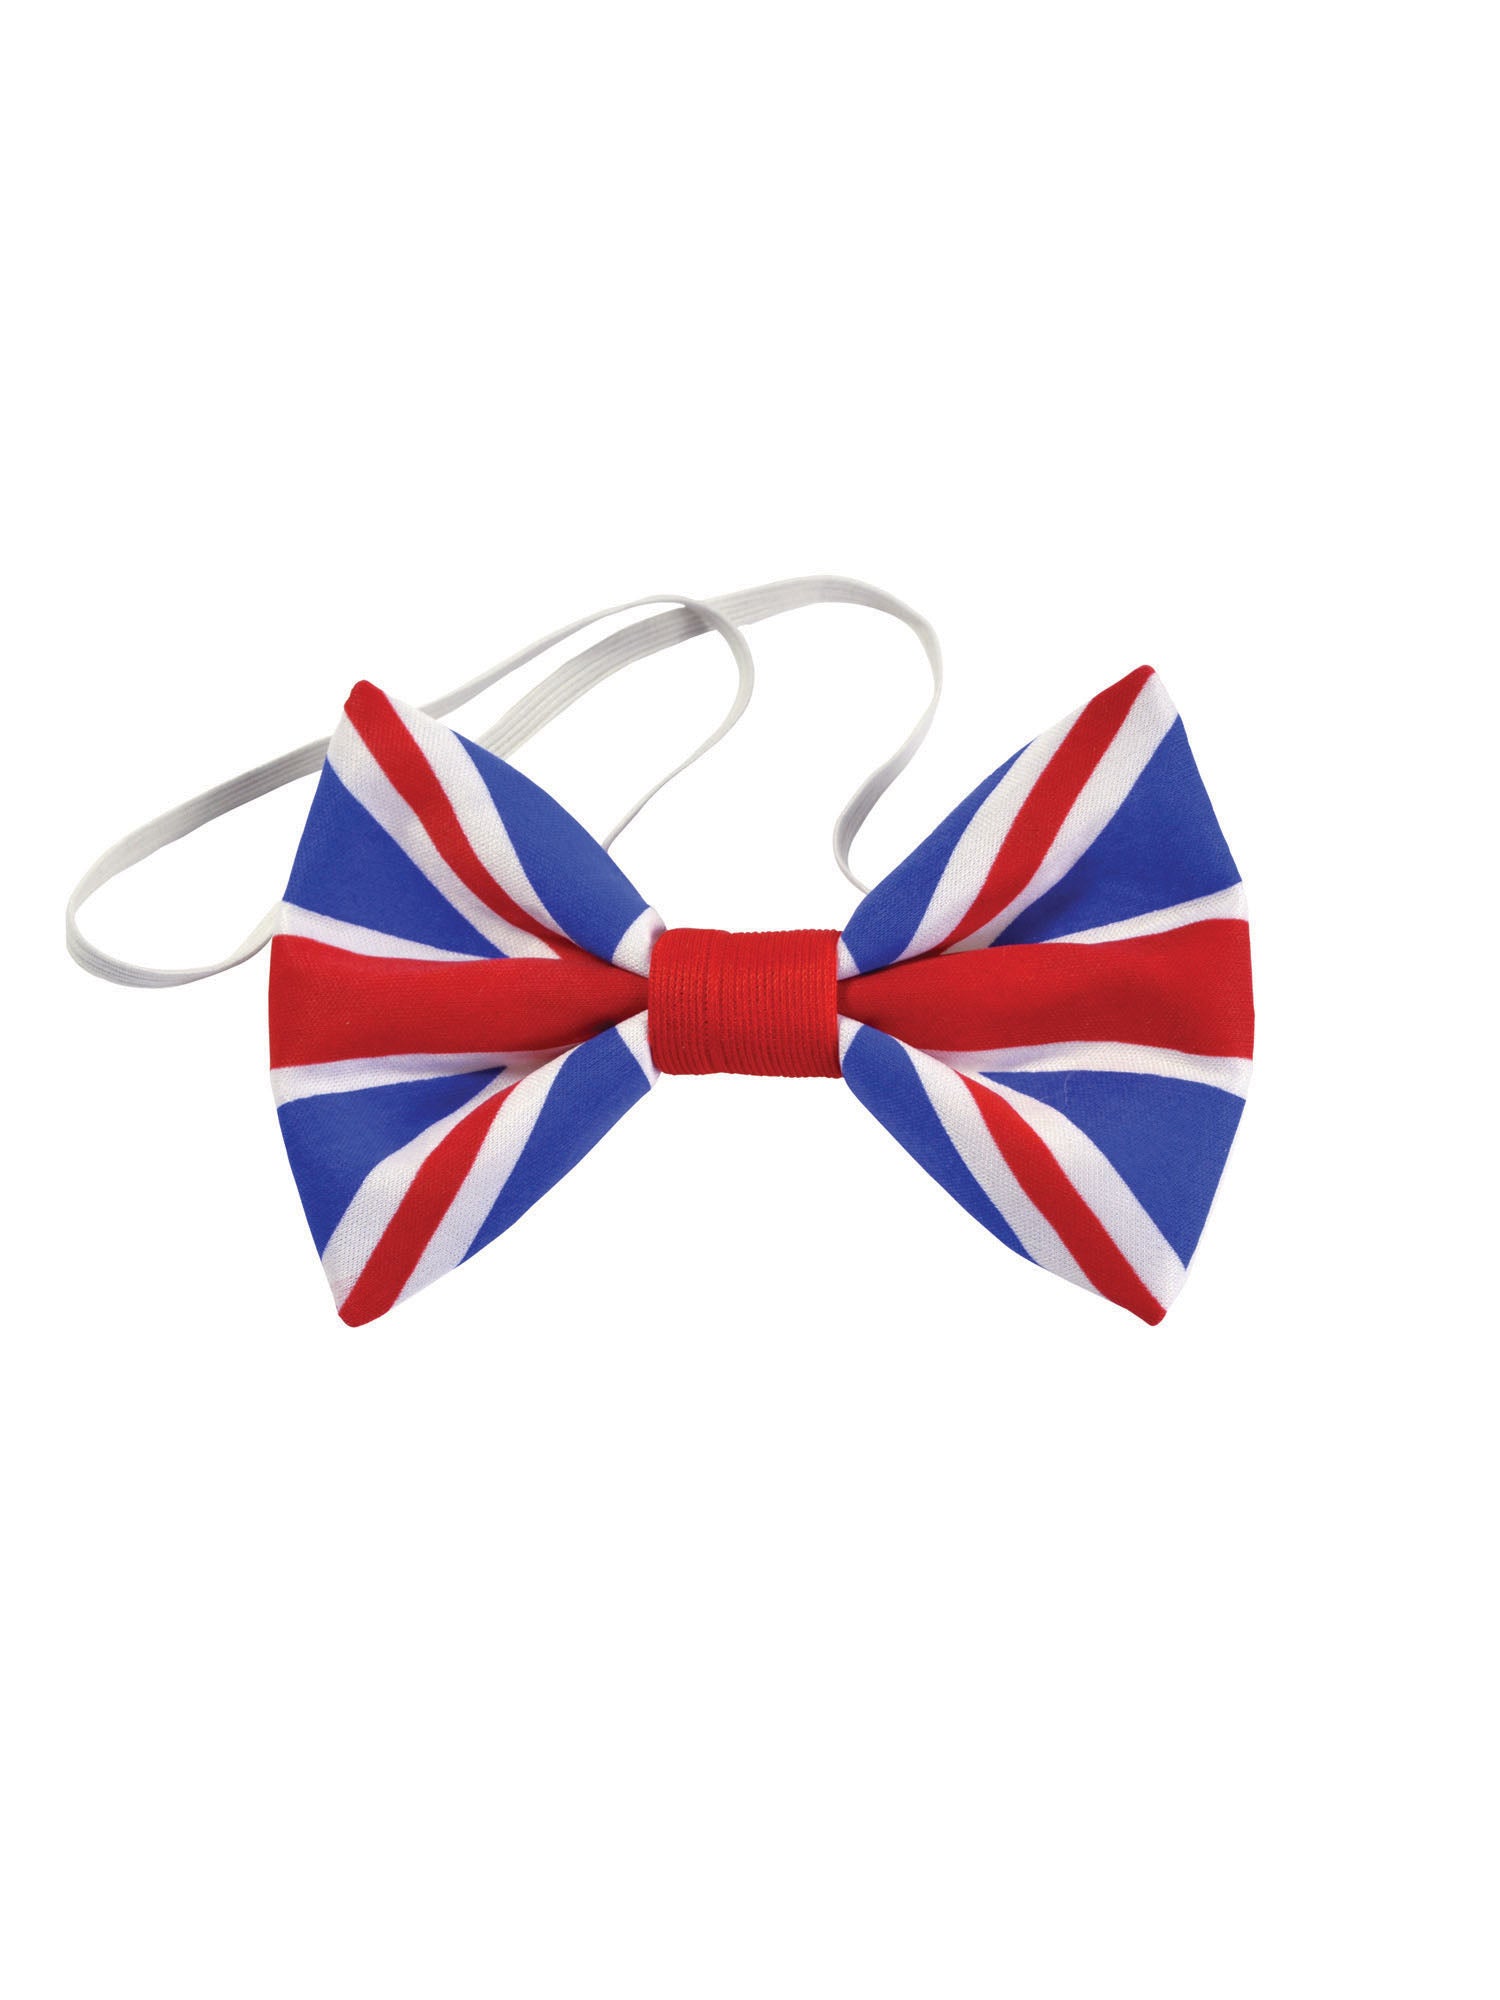 Union Jack, Multi, Generic, Accessories, One Size, Front